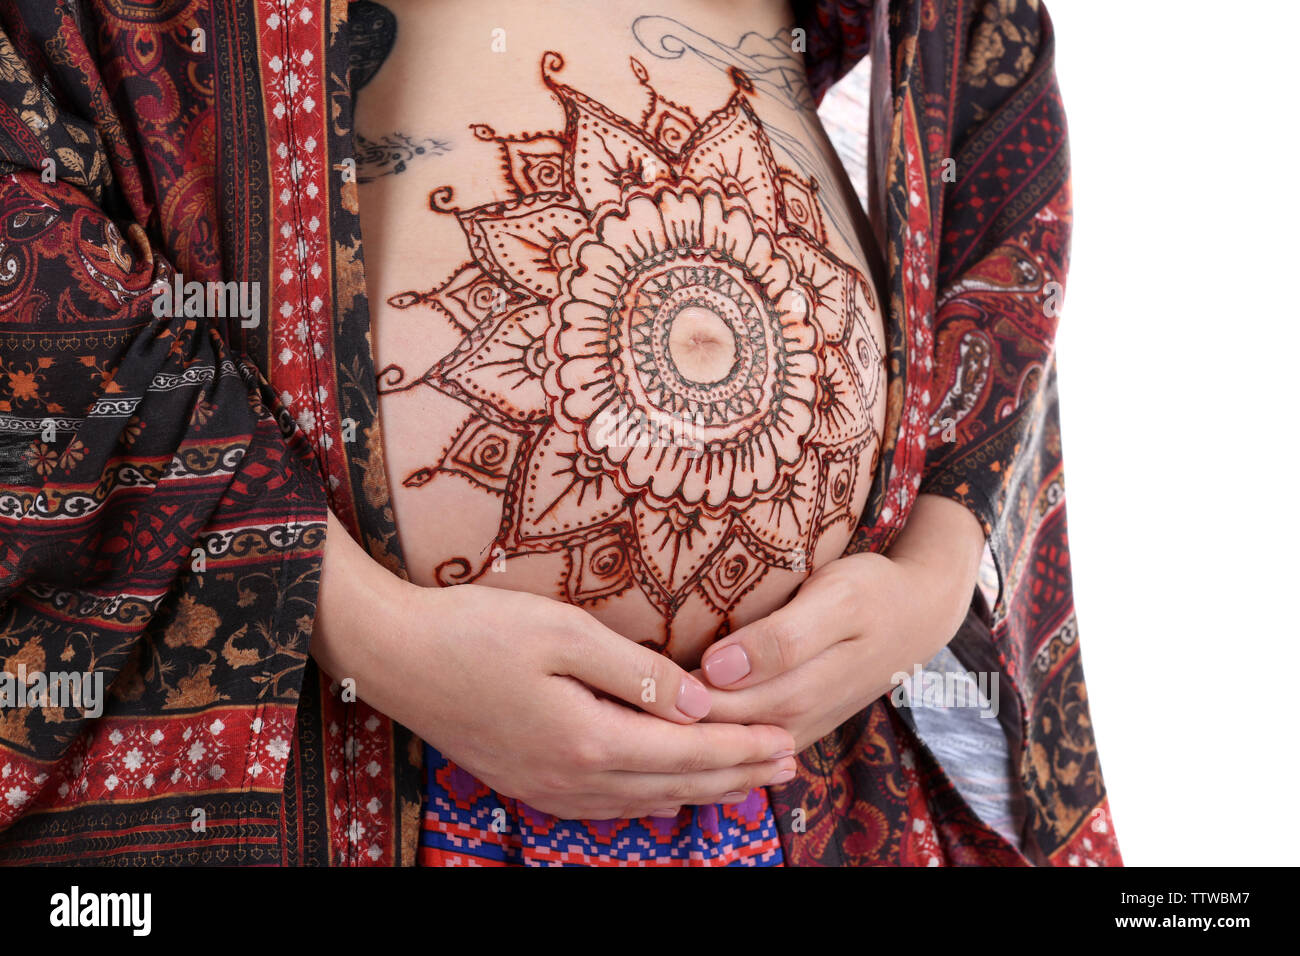 Pregnant Belly Henna Tattoo   YouTube